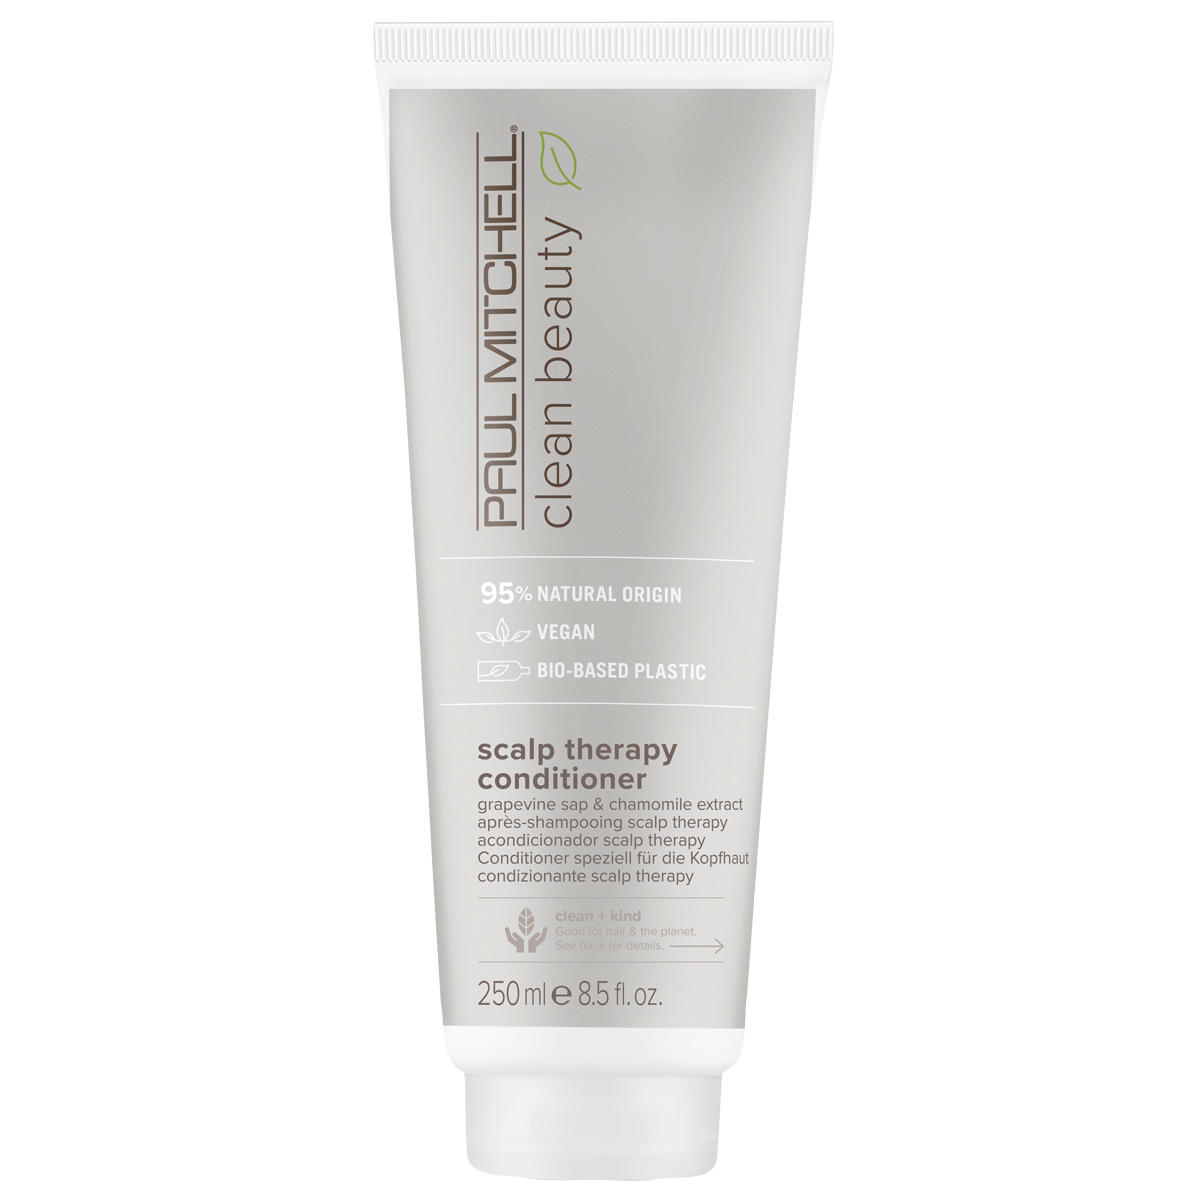 Paul Mitchell Clean Beauty Scalp Therapy Conditioner  - 1